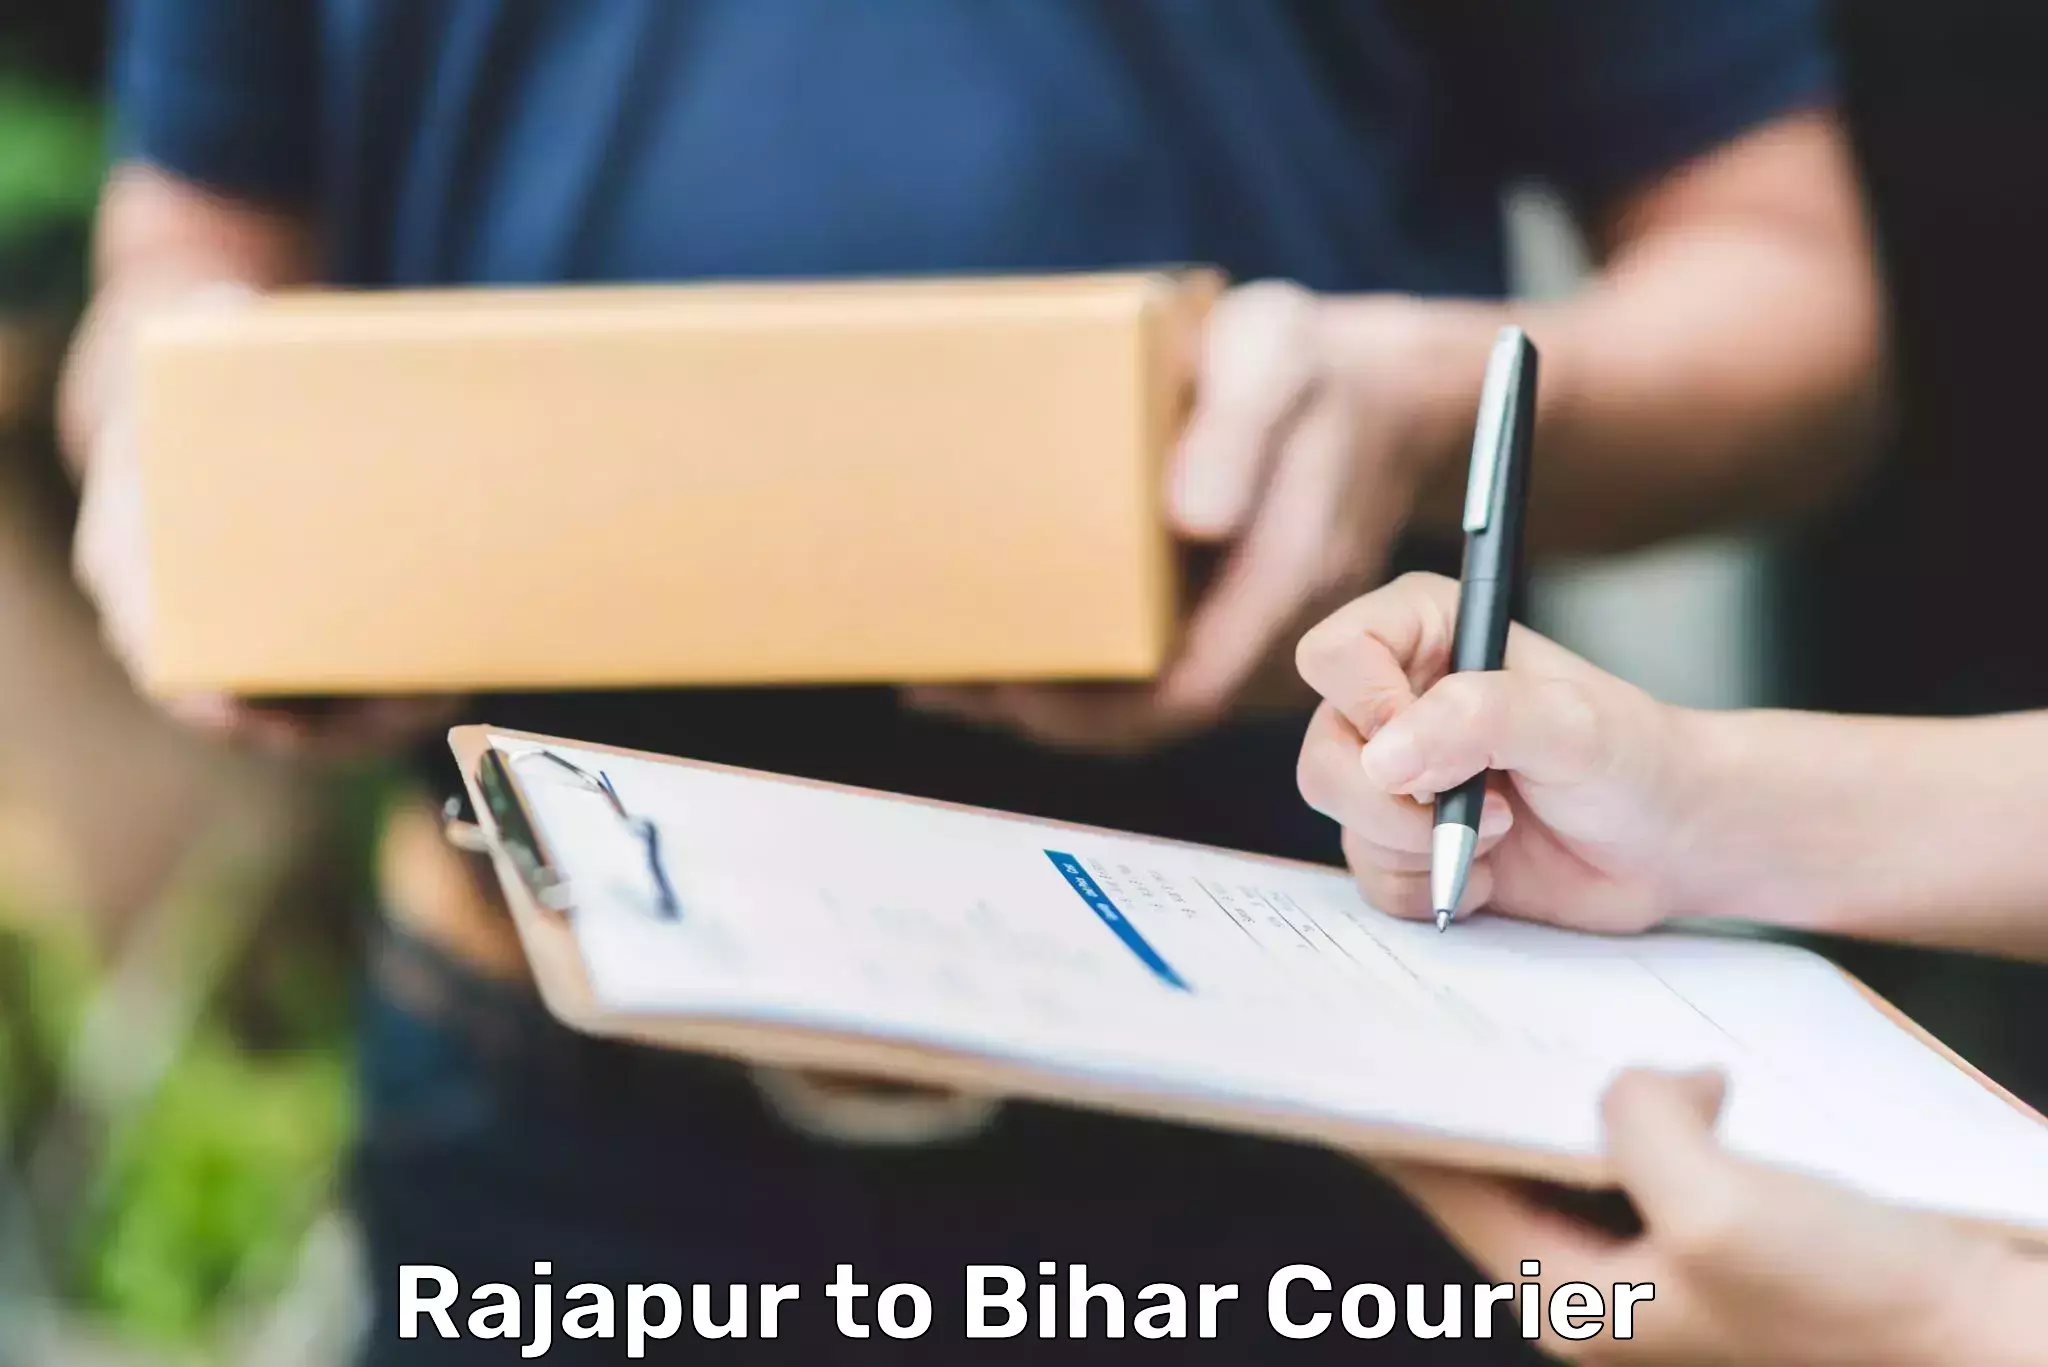 Global shipping networks Rajapur to Biraul